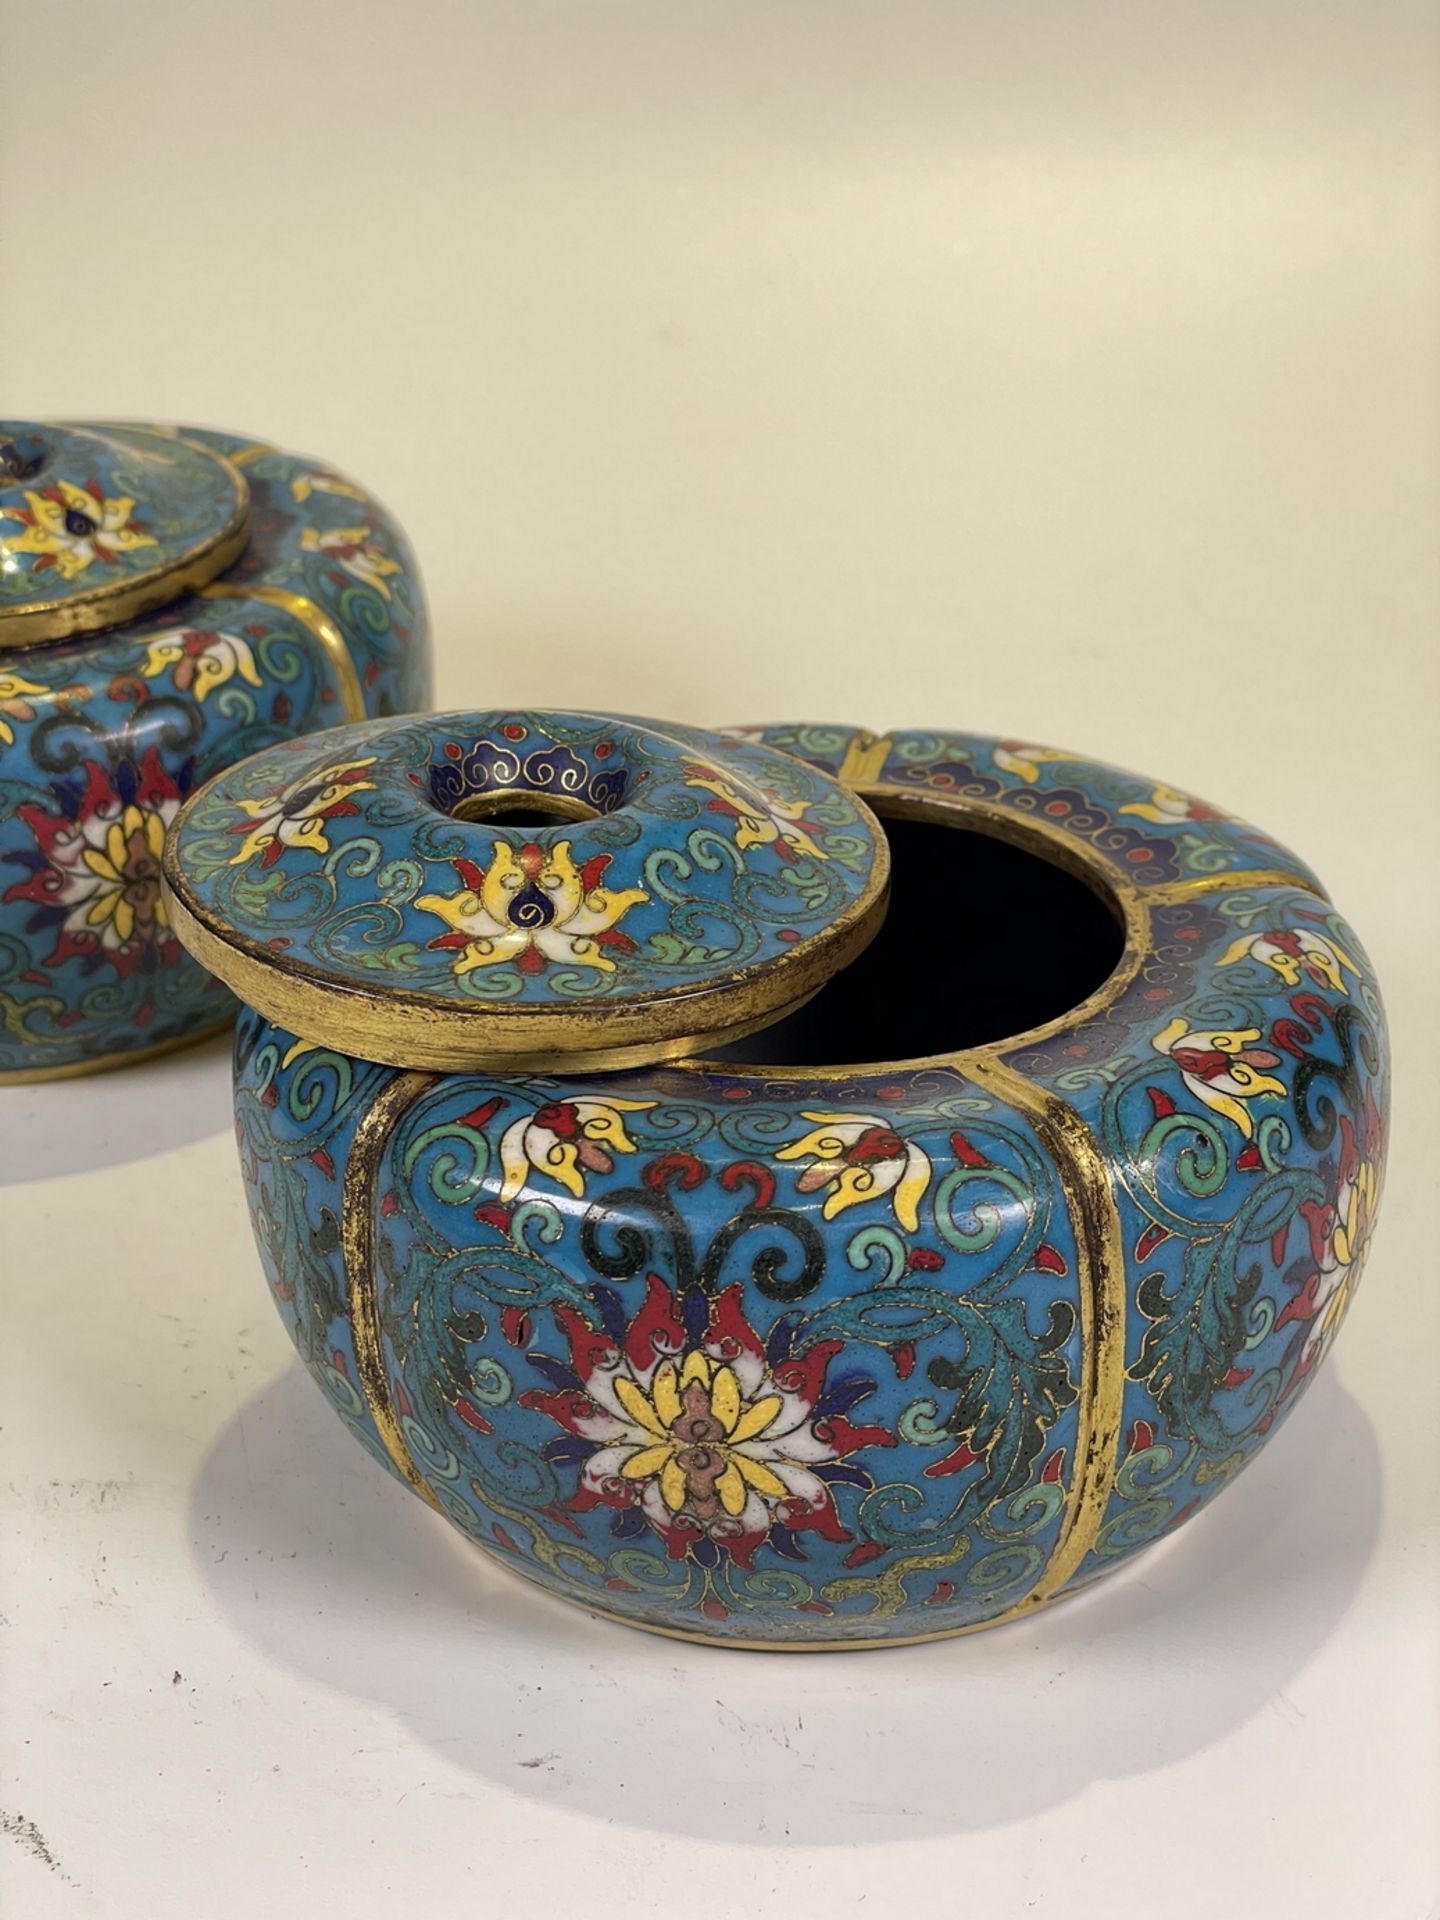 FINE CHINESE CLOISONNE, 18TH/19TH Century Pr. Collection of NARA private gallary.  - Image 6 of 6